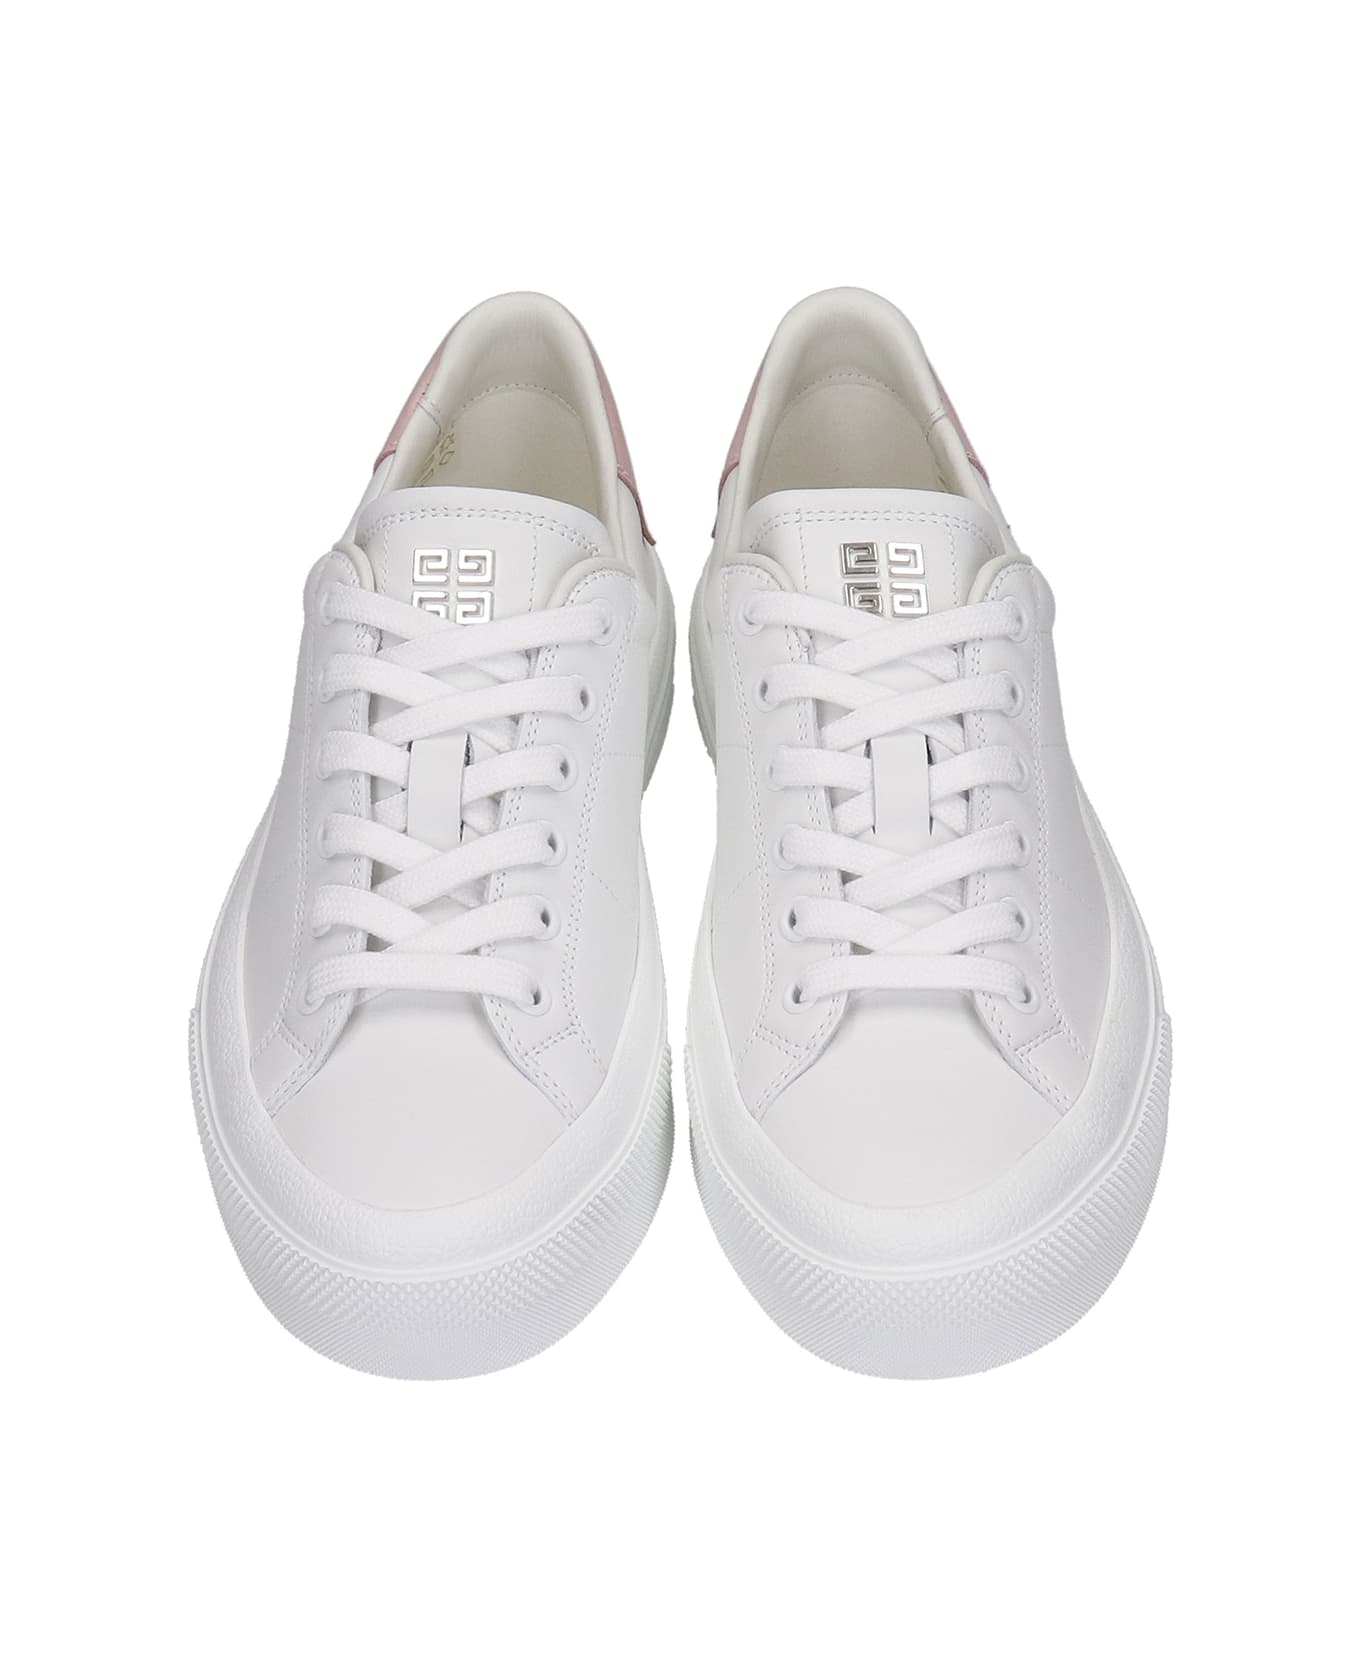 Givenchy Sneakers In White Leather - BIANCO